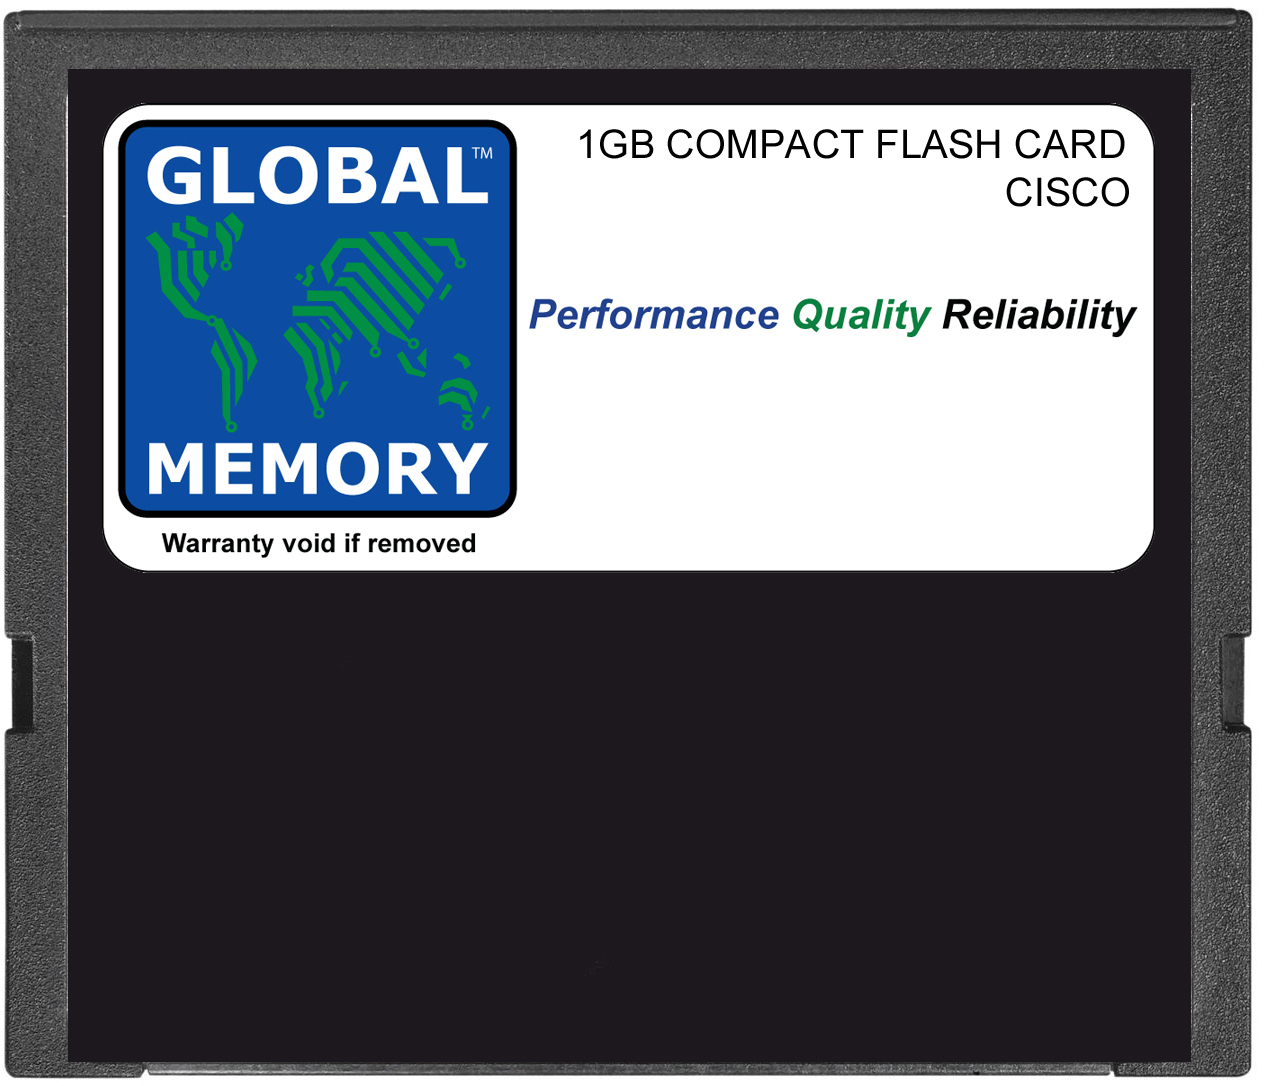 1GB COMPACT FLASH CARD MEMORY FOR CISCO 1900 / 2900 / 3900 SERIES ROUTERS (MEM-CF-1GB)